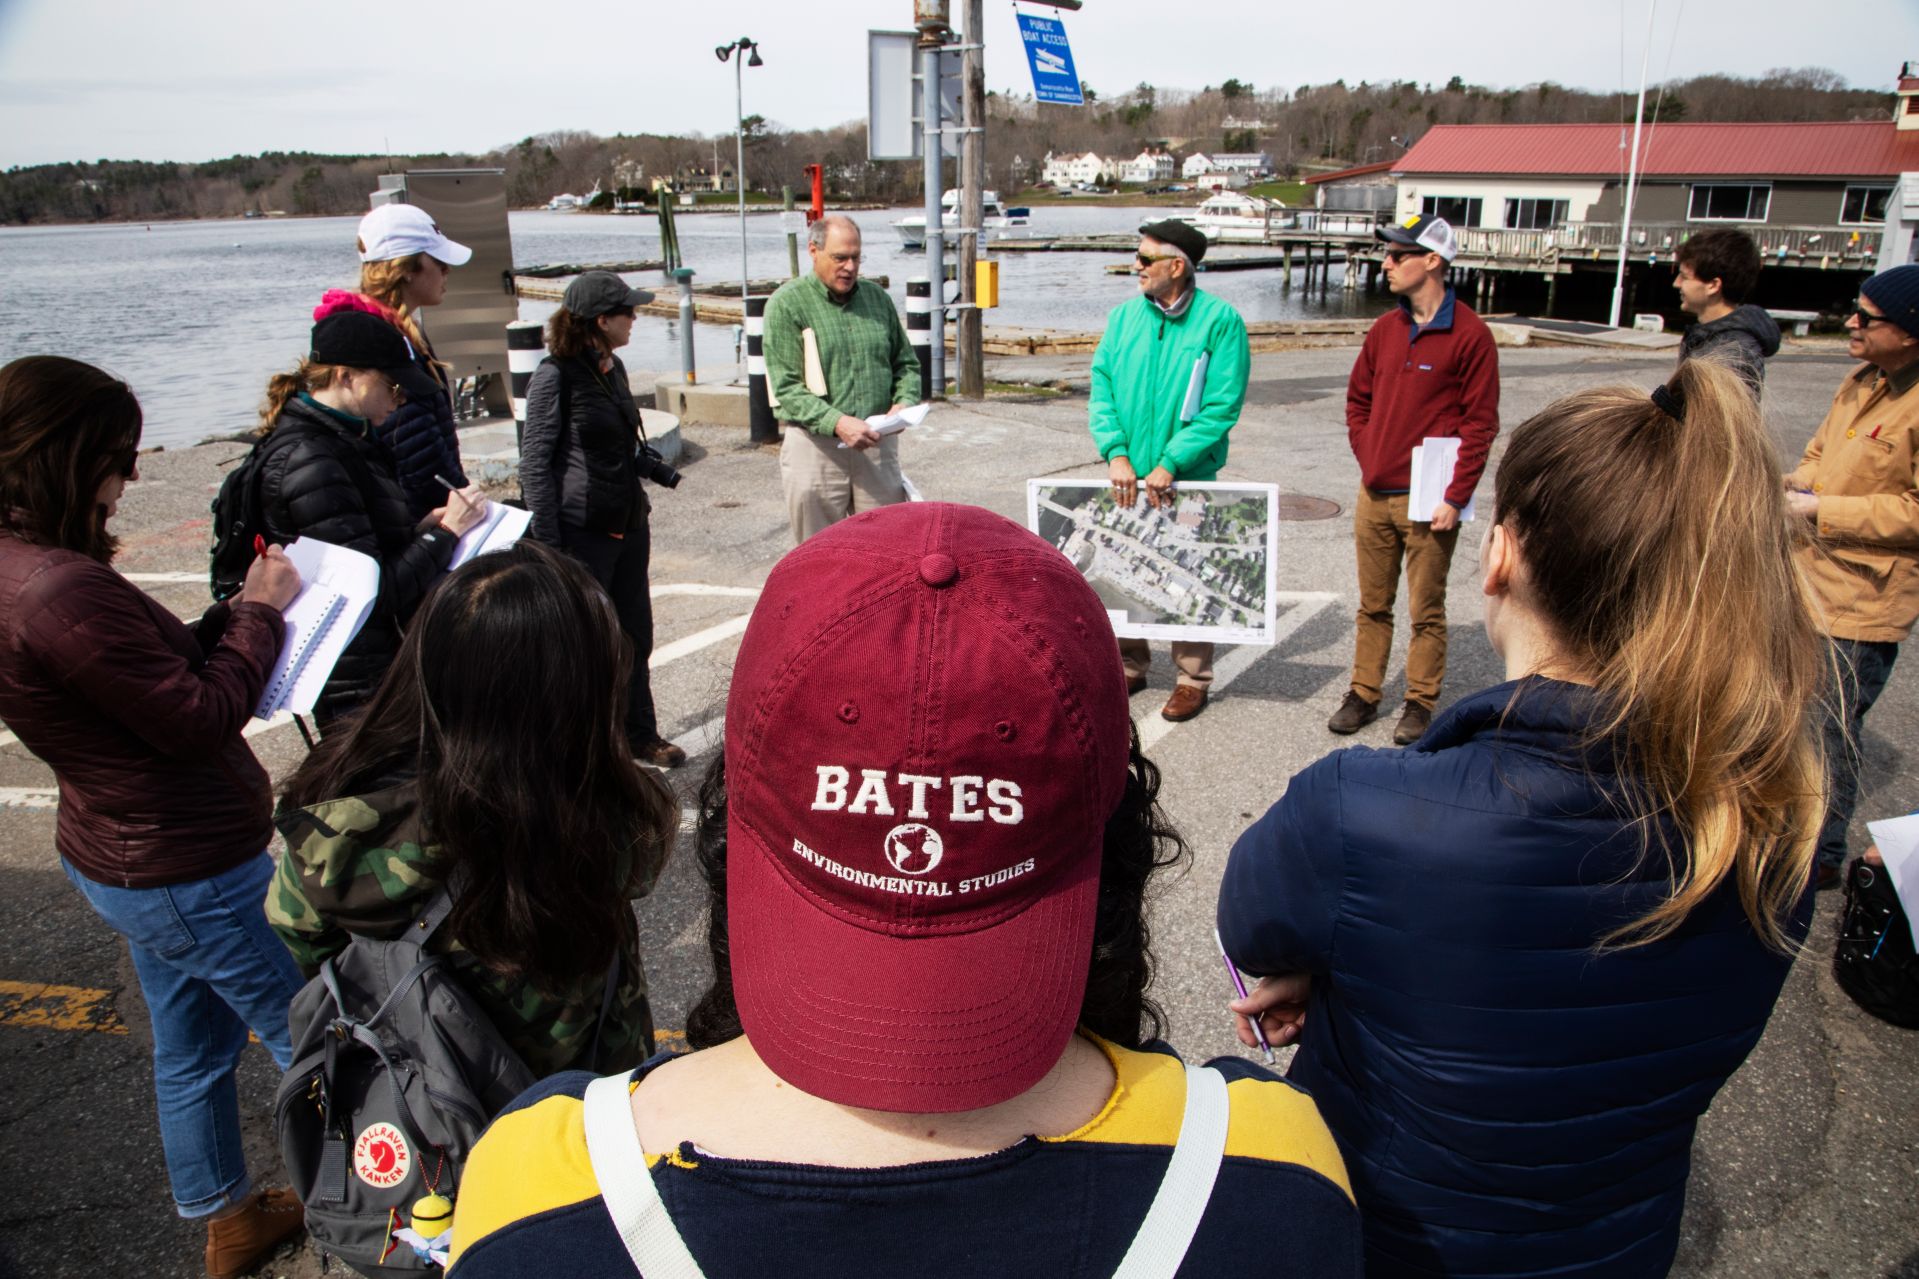 Bates students hear about flood response planning from Damariscotta Town Manager Matt Lutkus, center left, and former county planner Bob Faunce, center right, during their May 1 visit. (Theophil Syslo/Bates College)